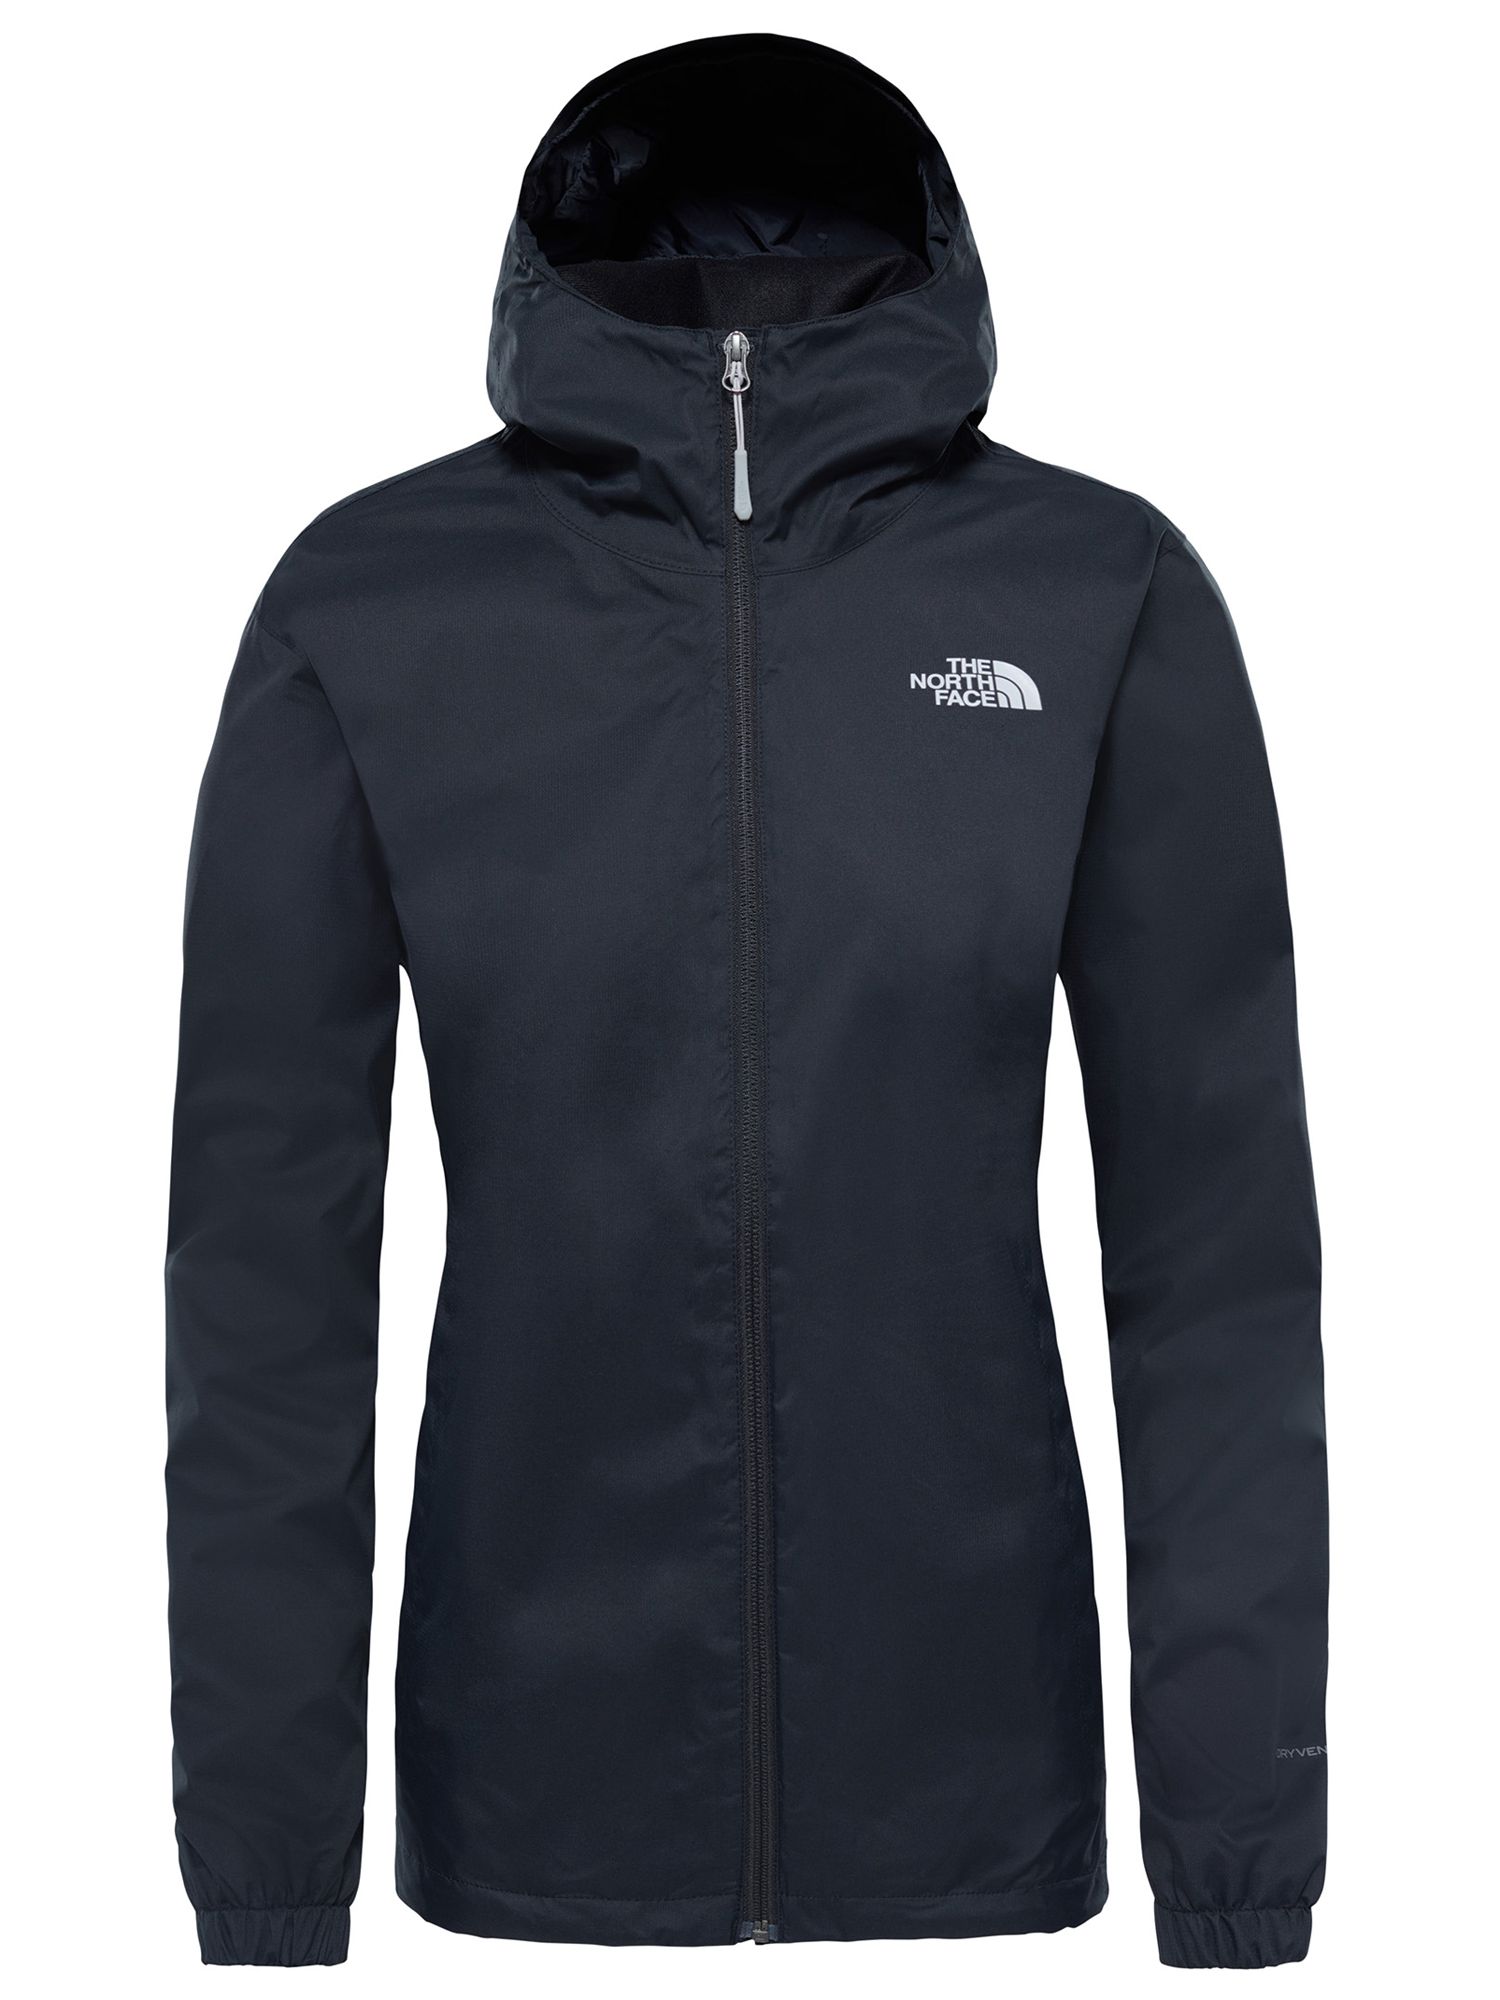 The North Face Quest Women's Waterproof 